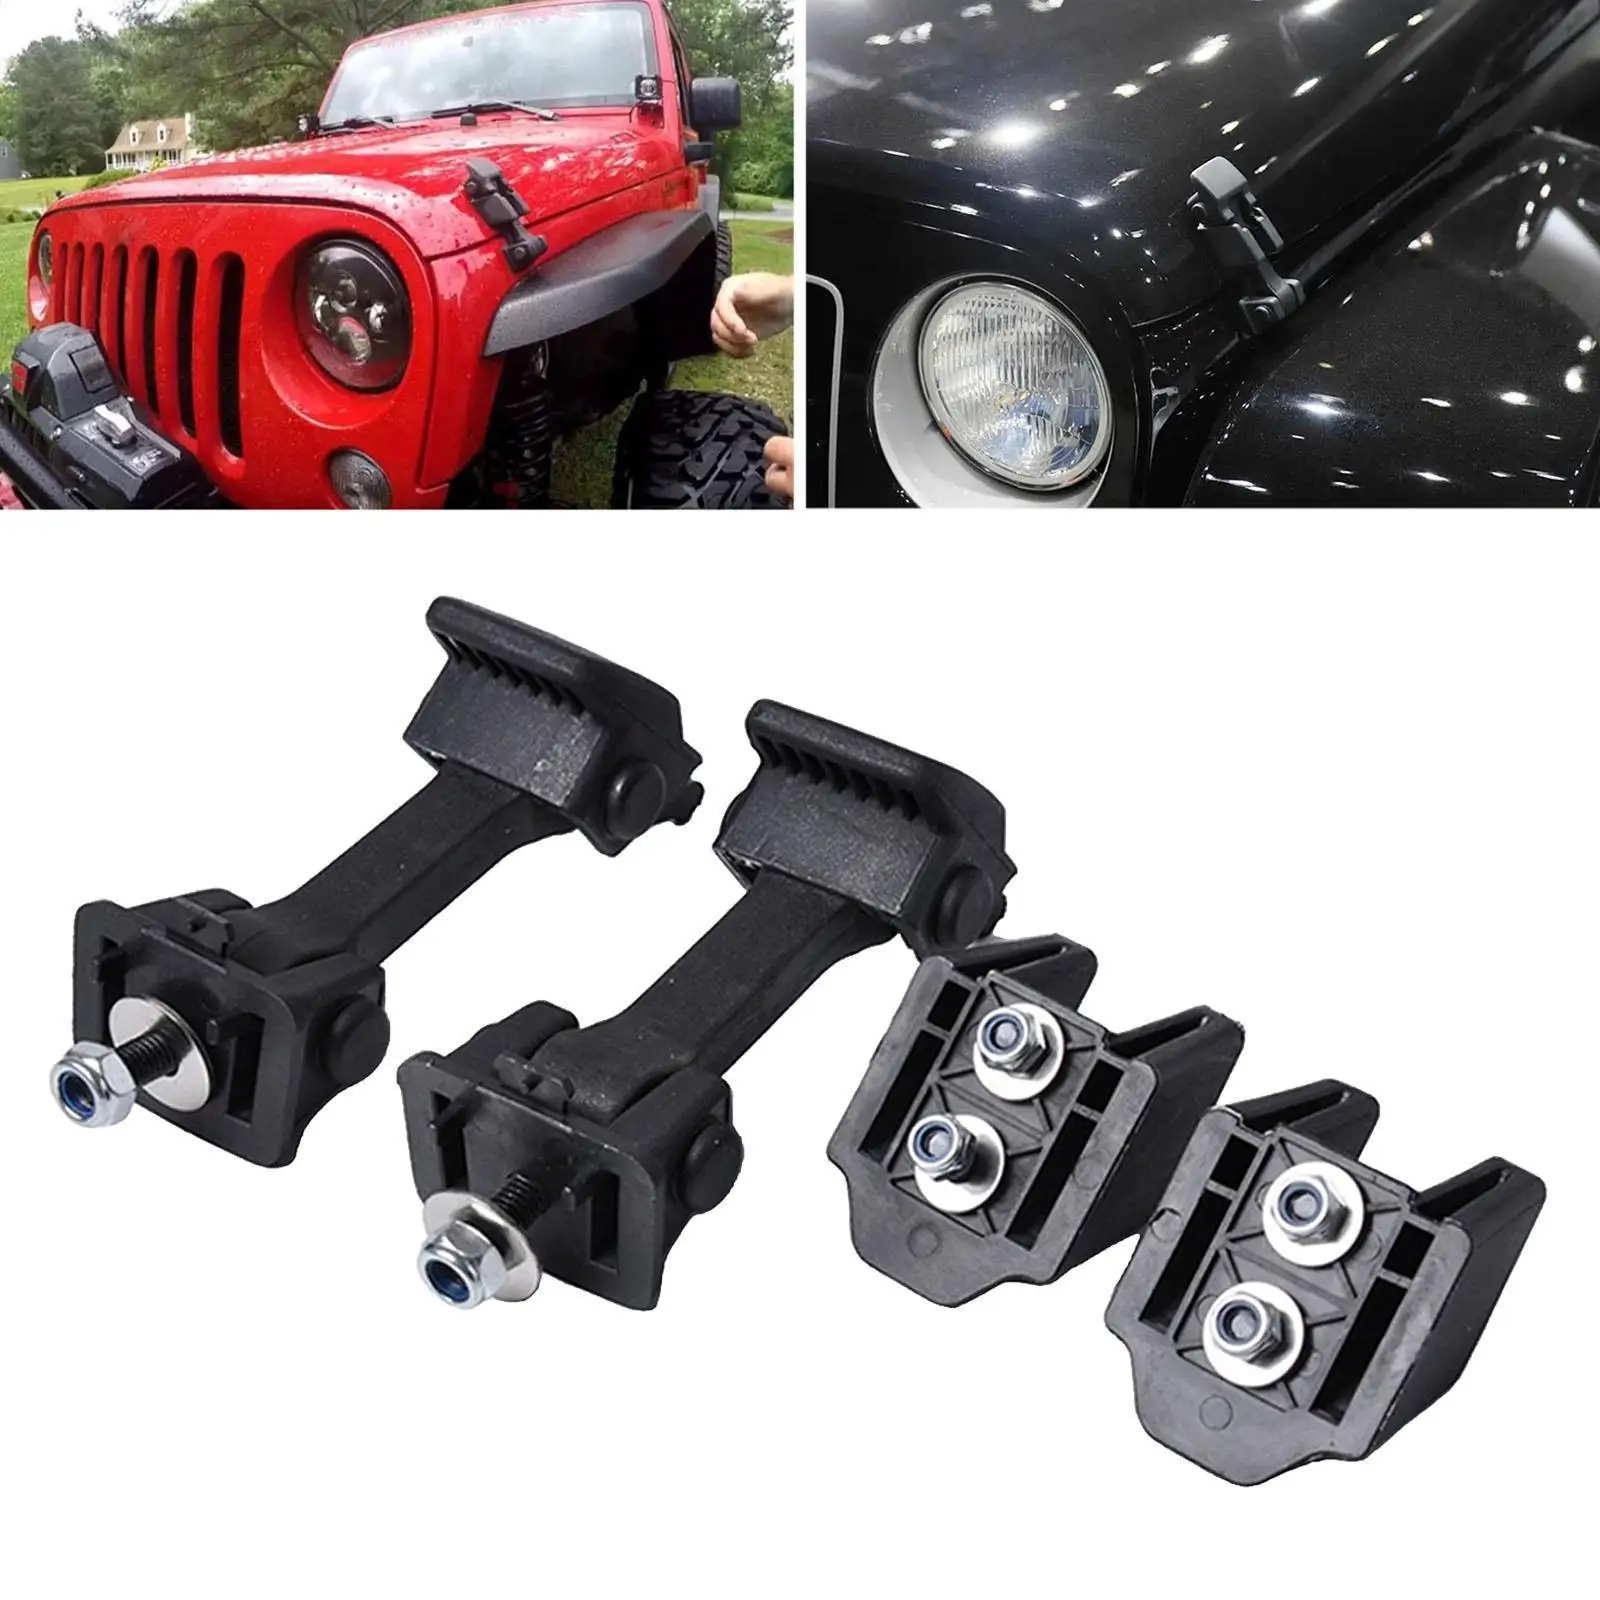 1 Pair of Hood Locks Catch Kit Shockproof Locking Hood for for  for JK 2007 Accessories Black